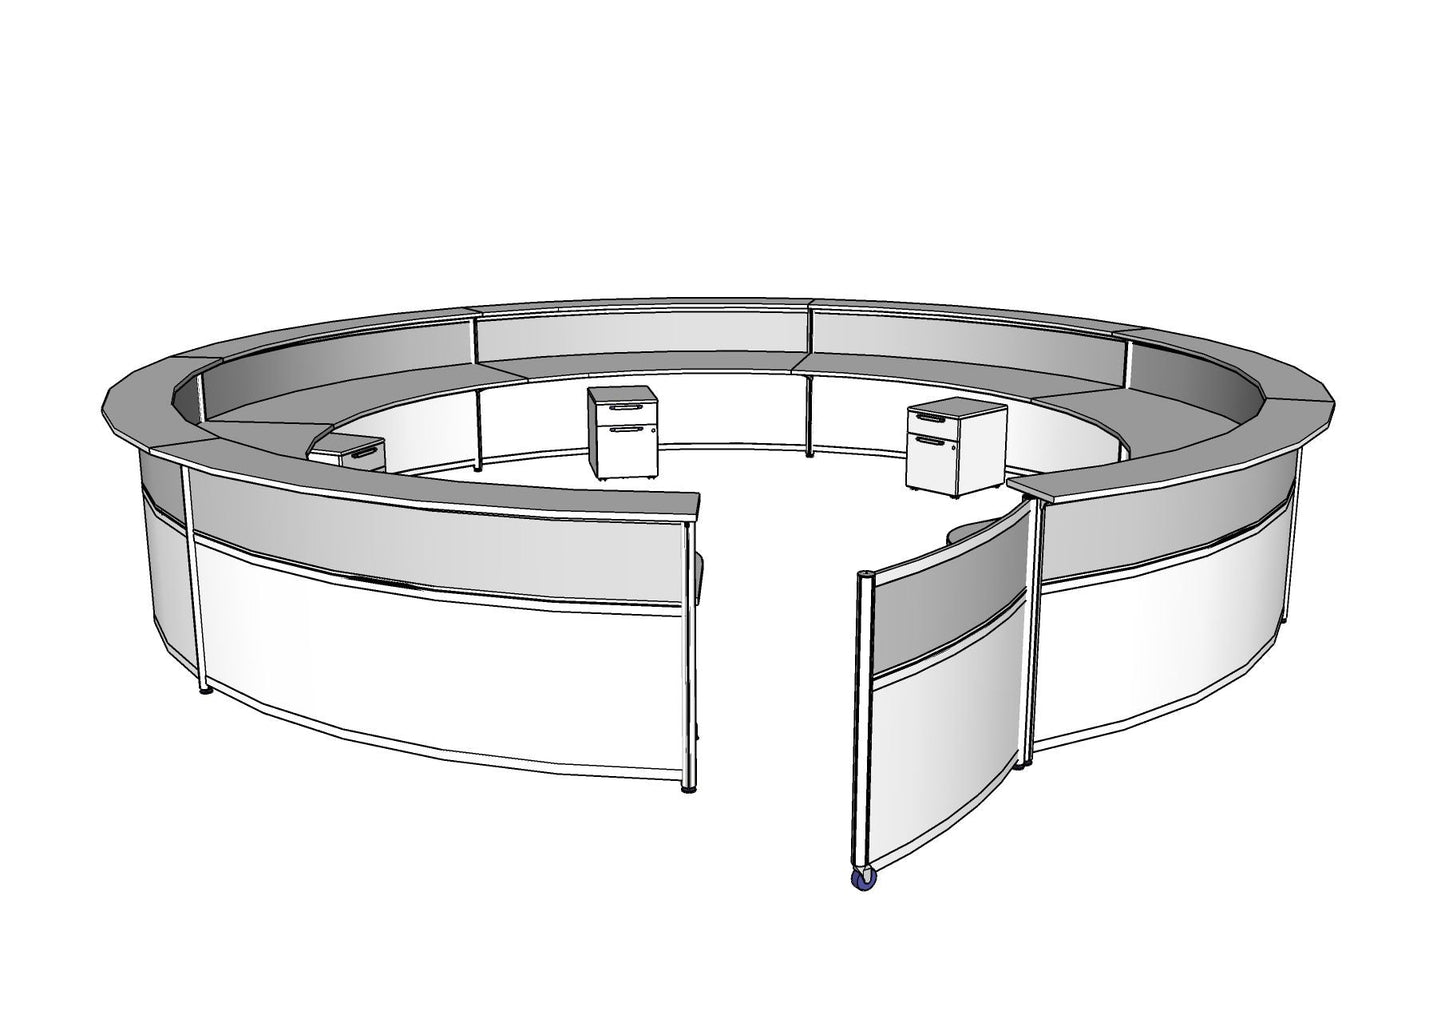 Large Multi Person Curved Circular Reception PBR006